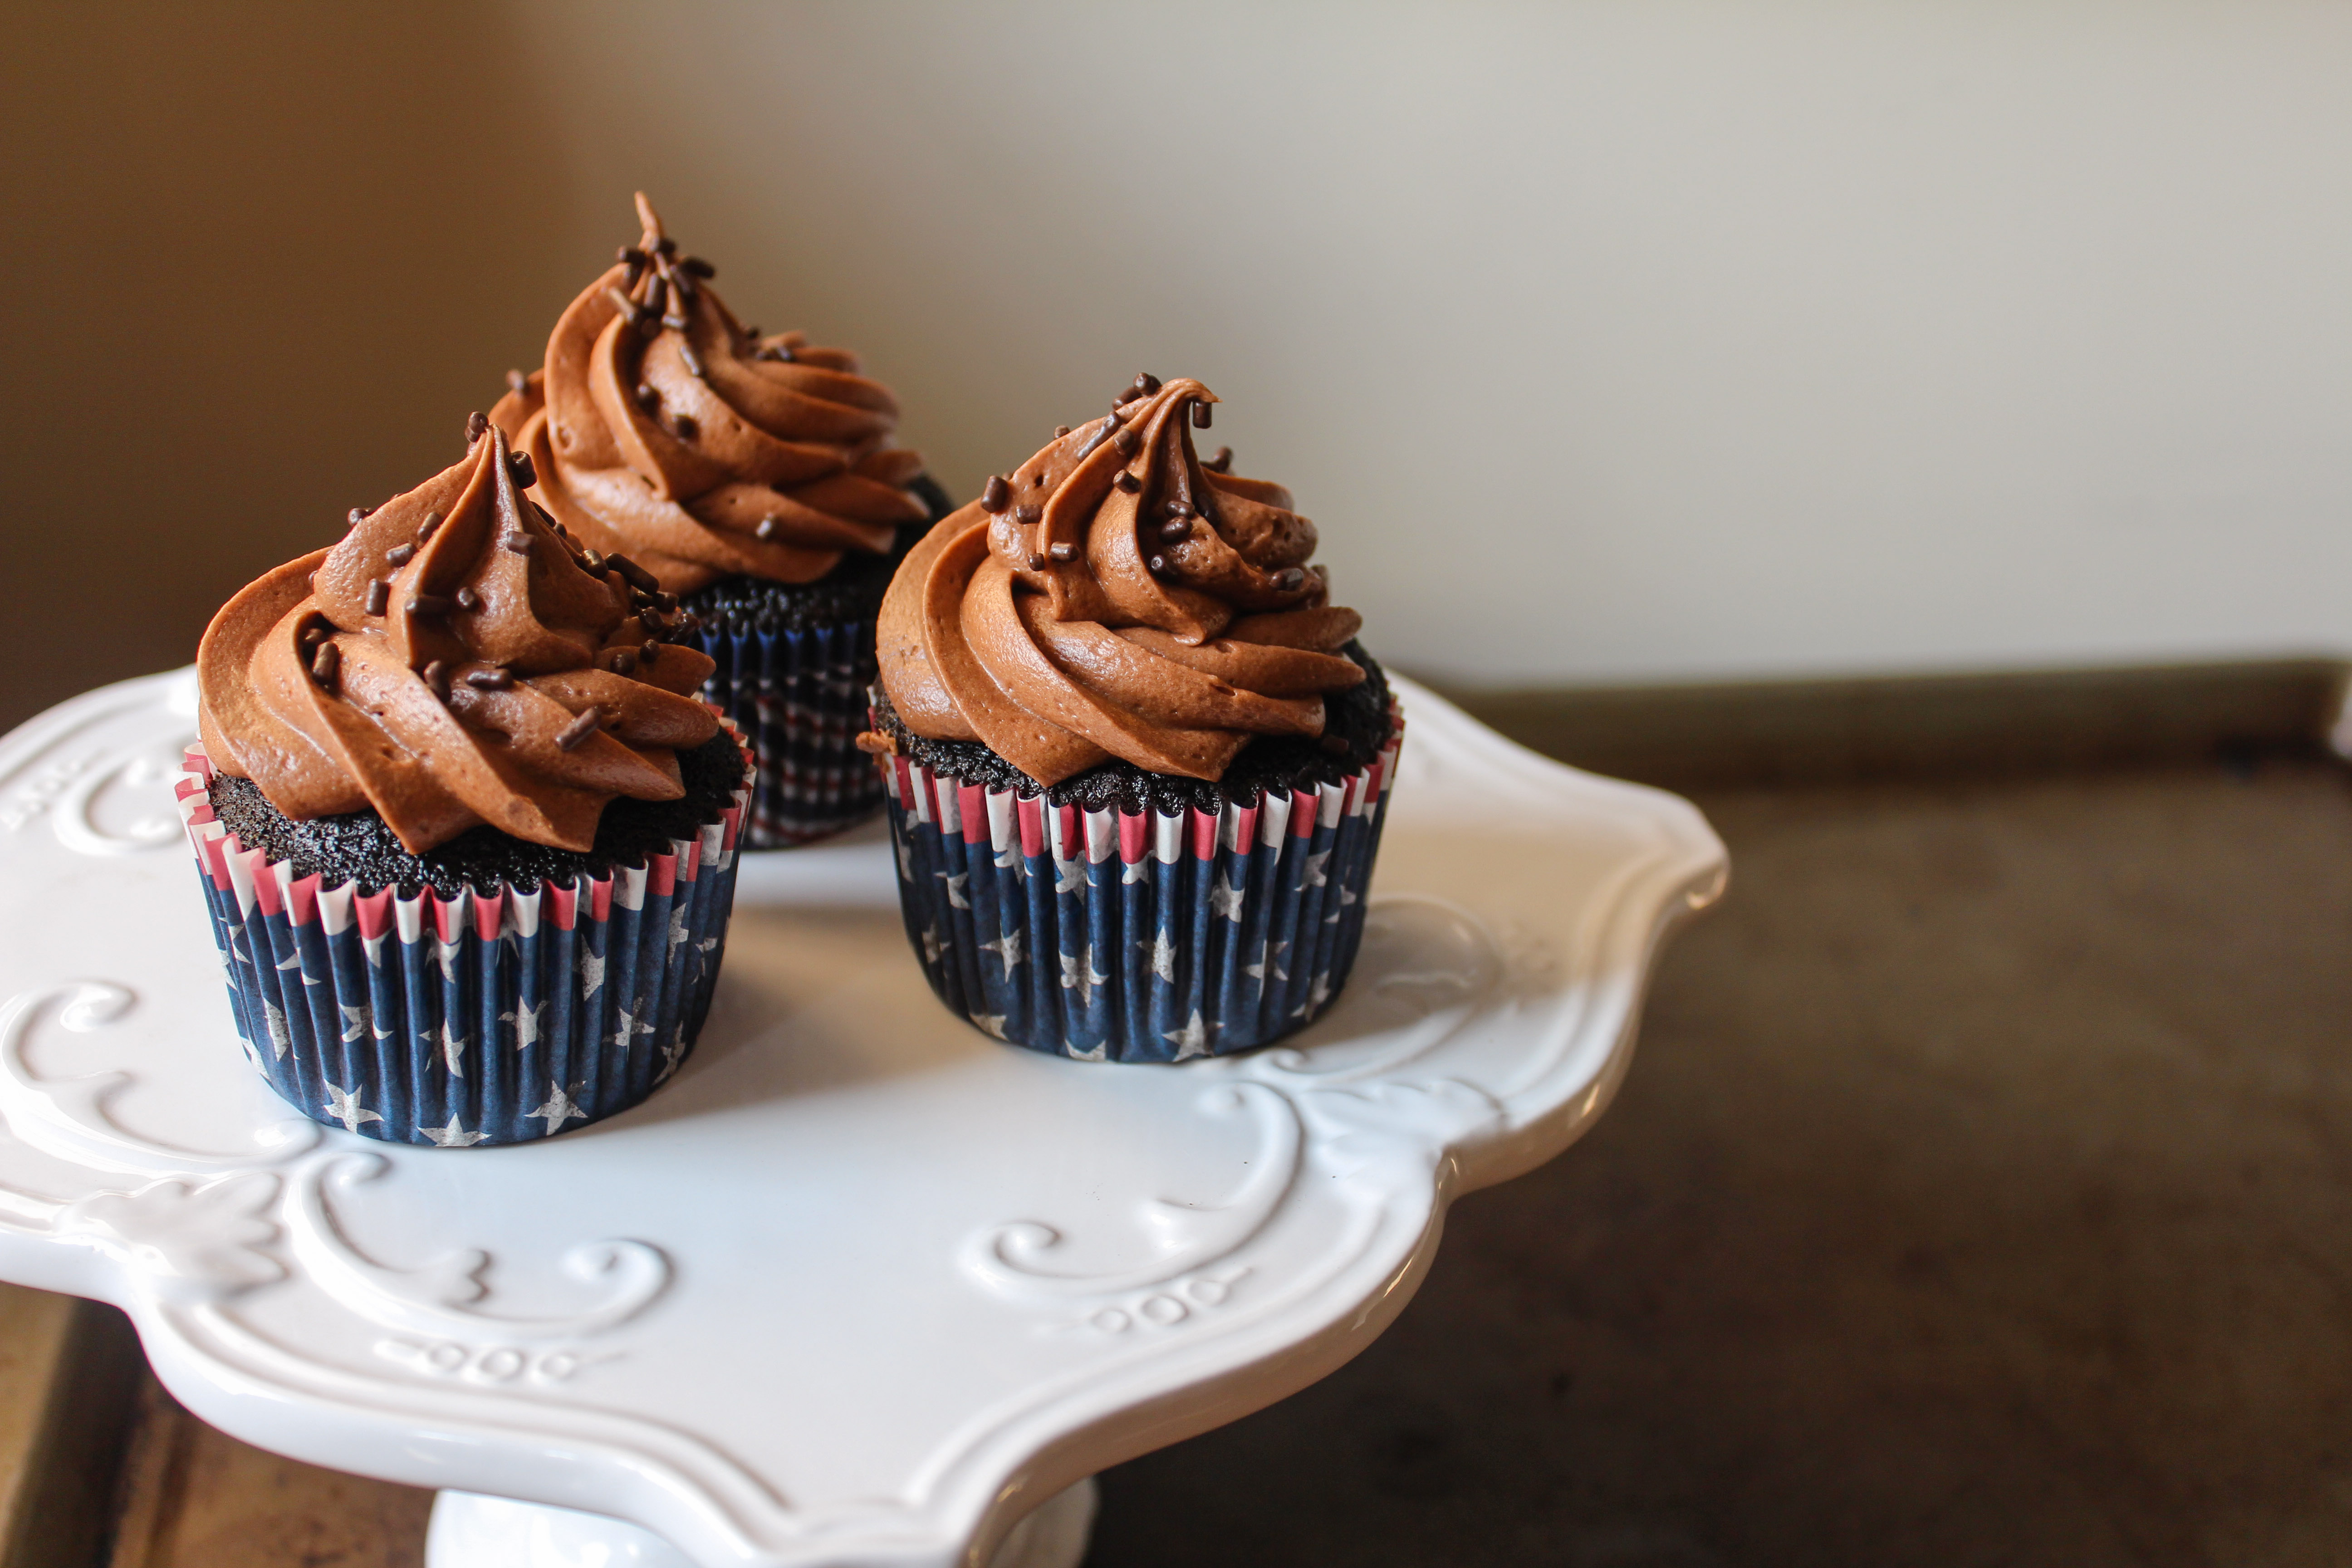 Triple Chocolate Cupcakes - decadent chocolate cupcakes filled with homemade chocolate ganache and topped with the BEST chocolate frosting!